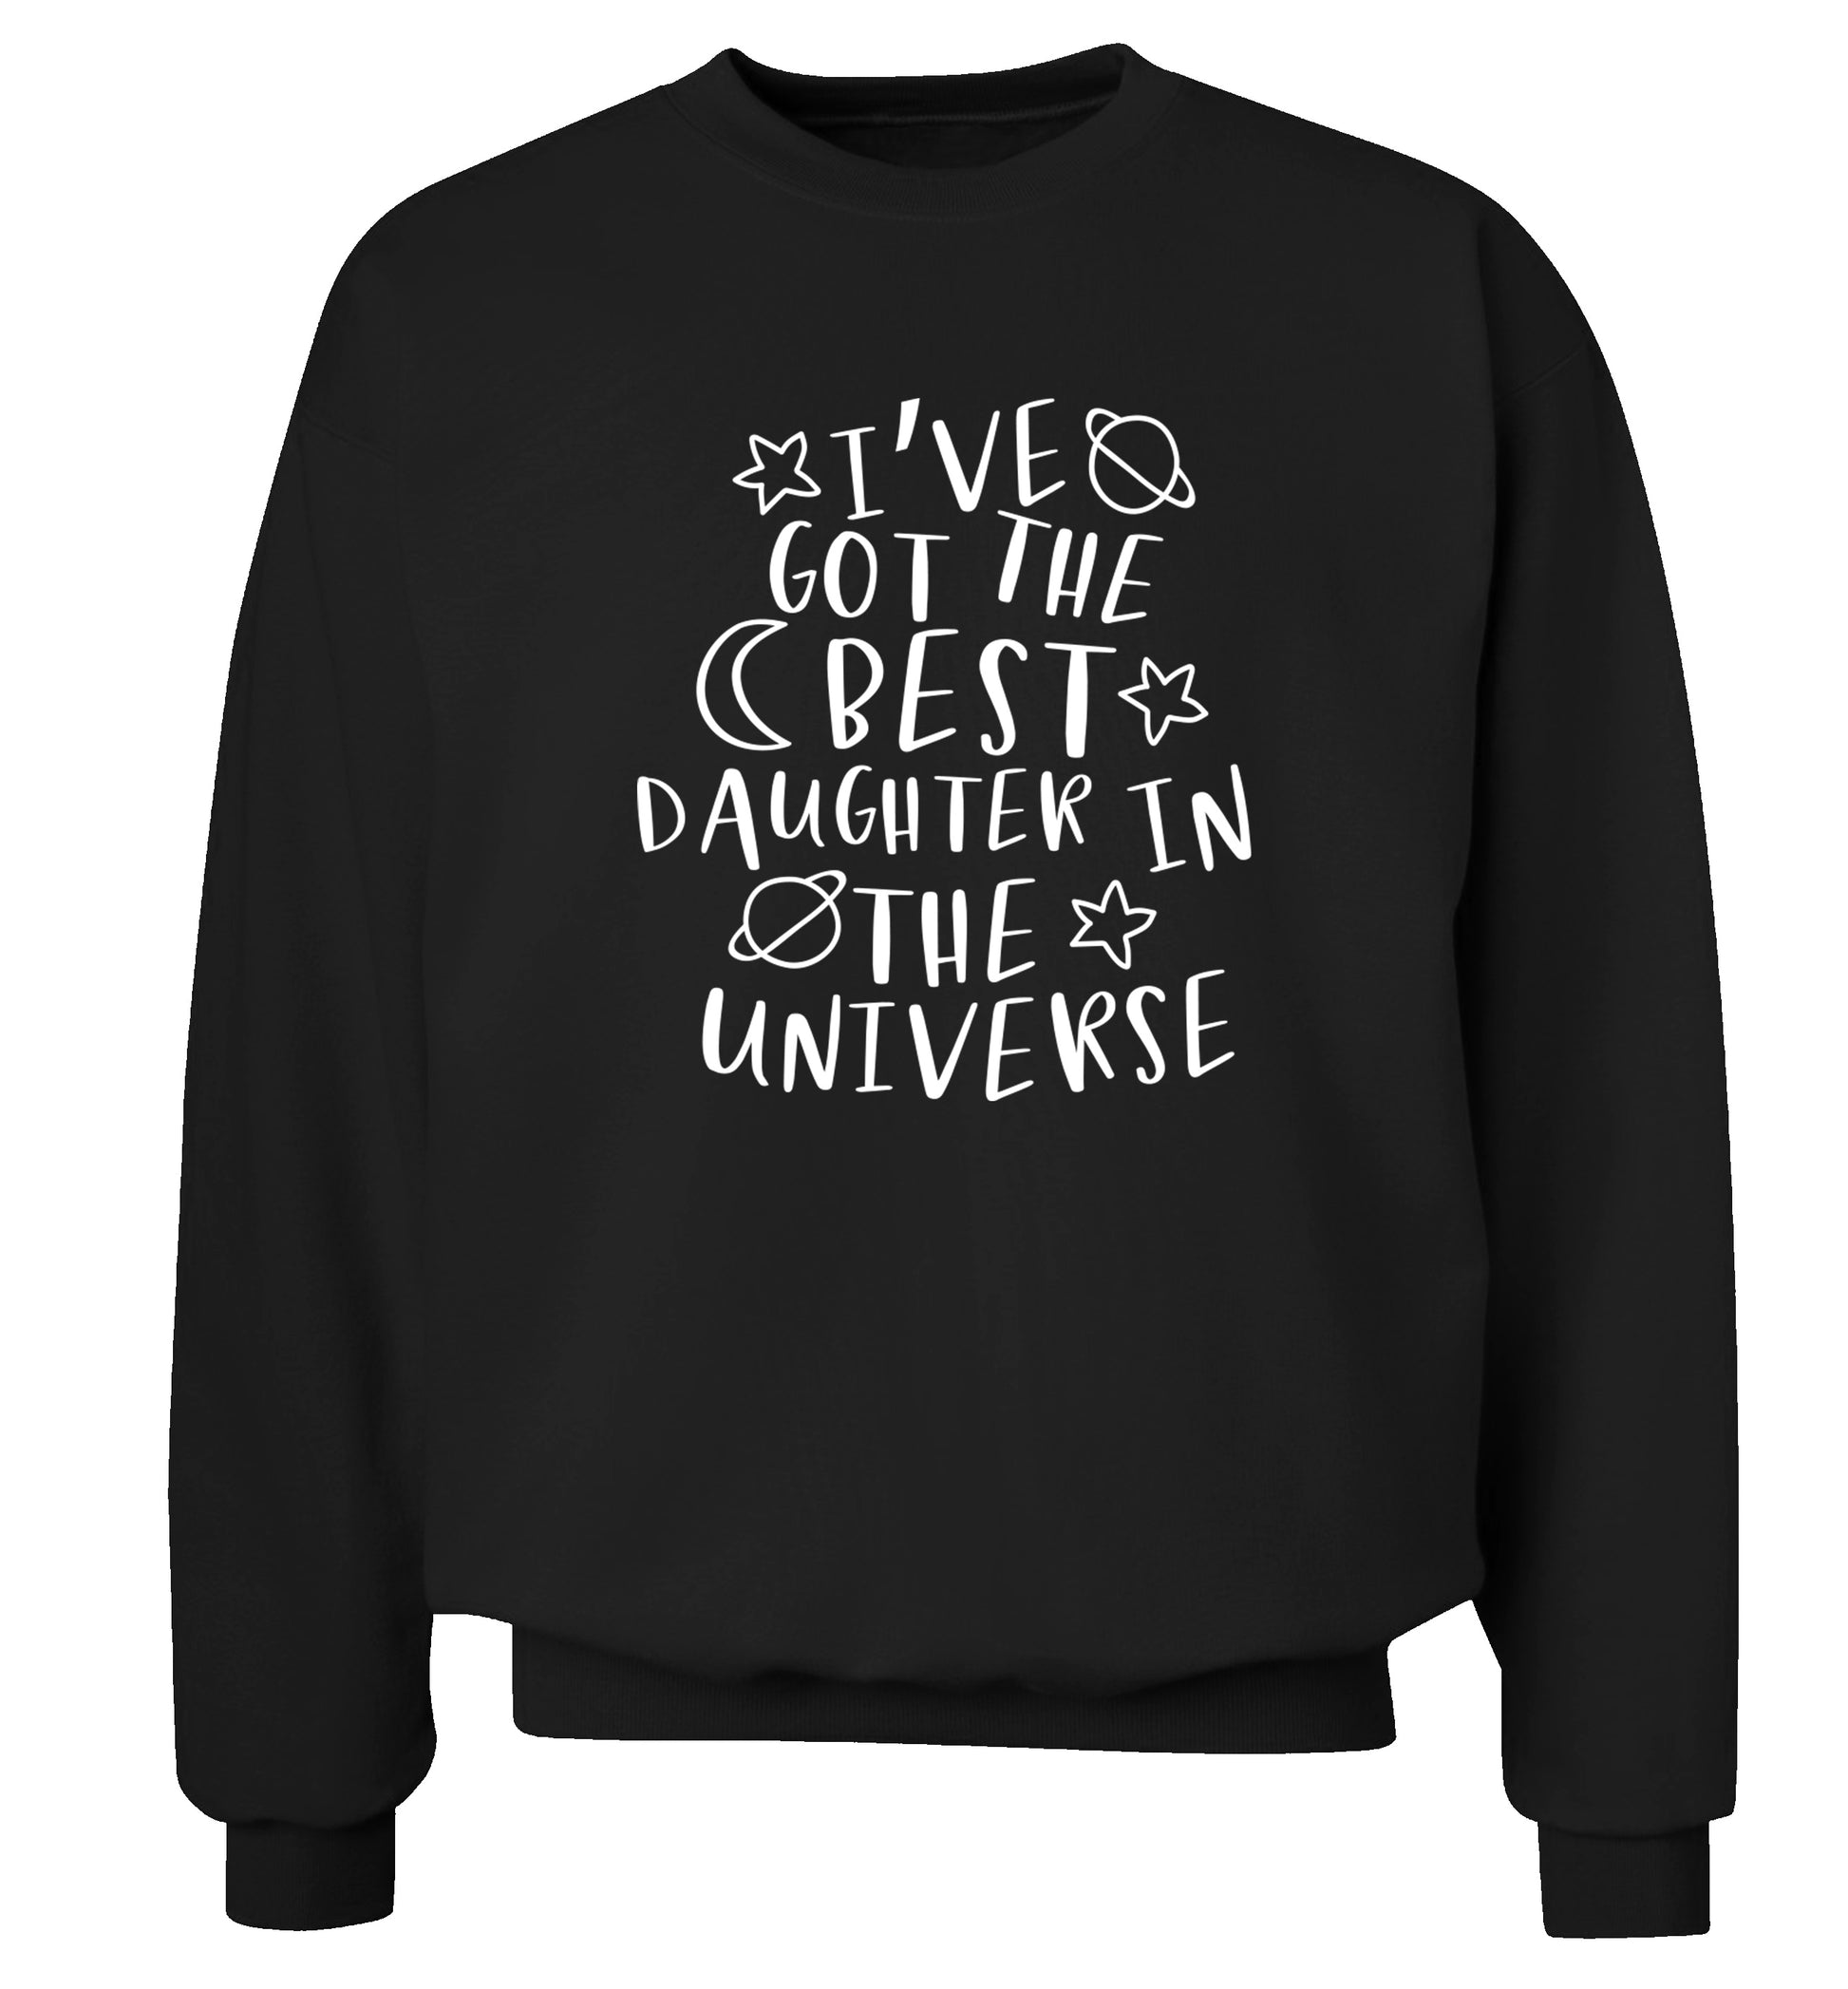 I've got the best daughter in the universe Adult's unisex black Sweater 2XL